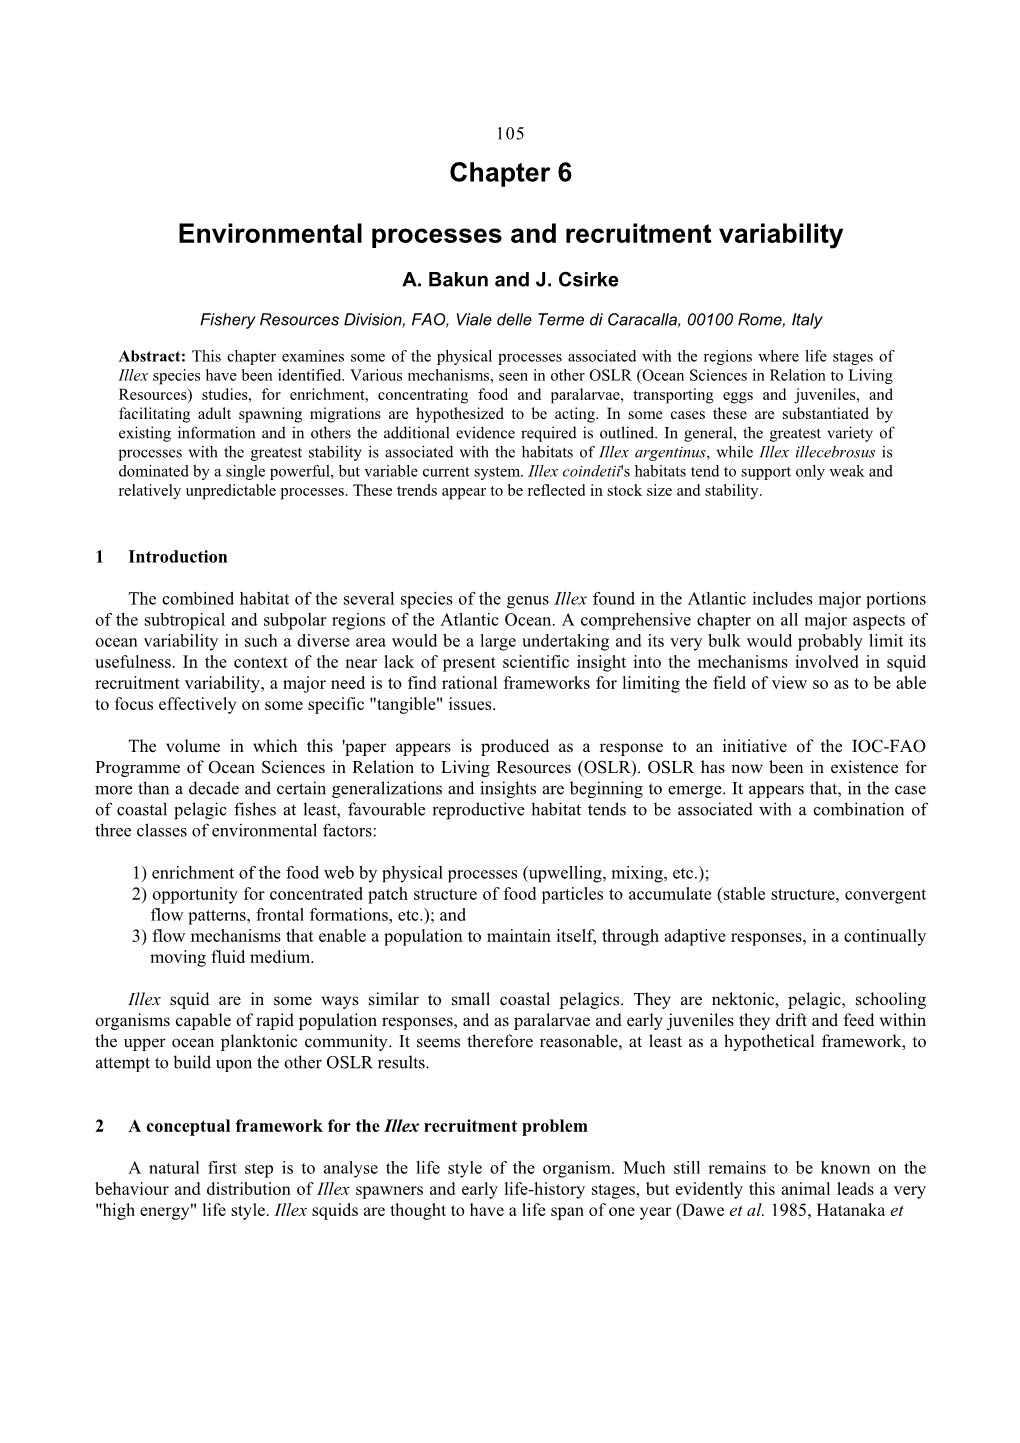 Chapter 6 Environmental Processes and Recruitment Variability